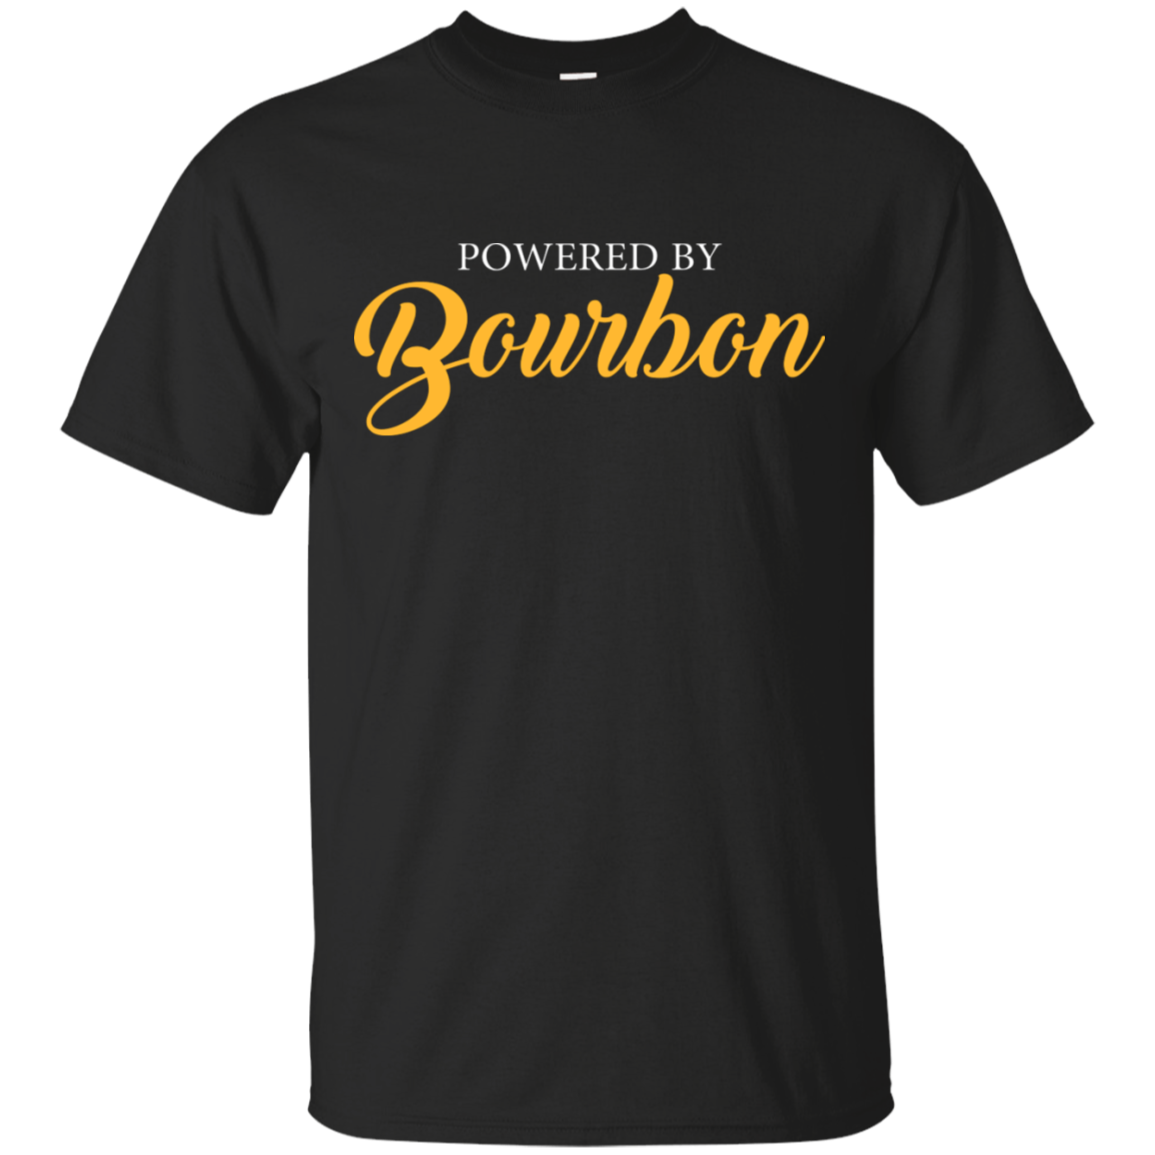 Powered By BourBon T-Shirt Apparel - The Beer Lodge